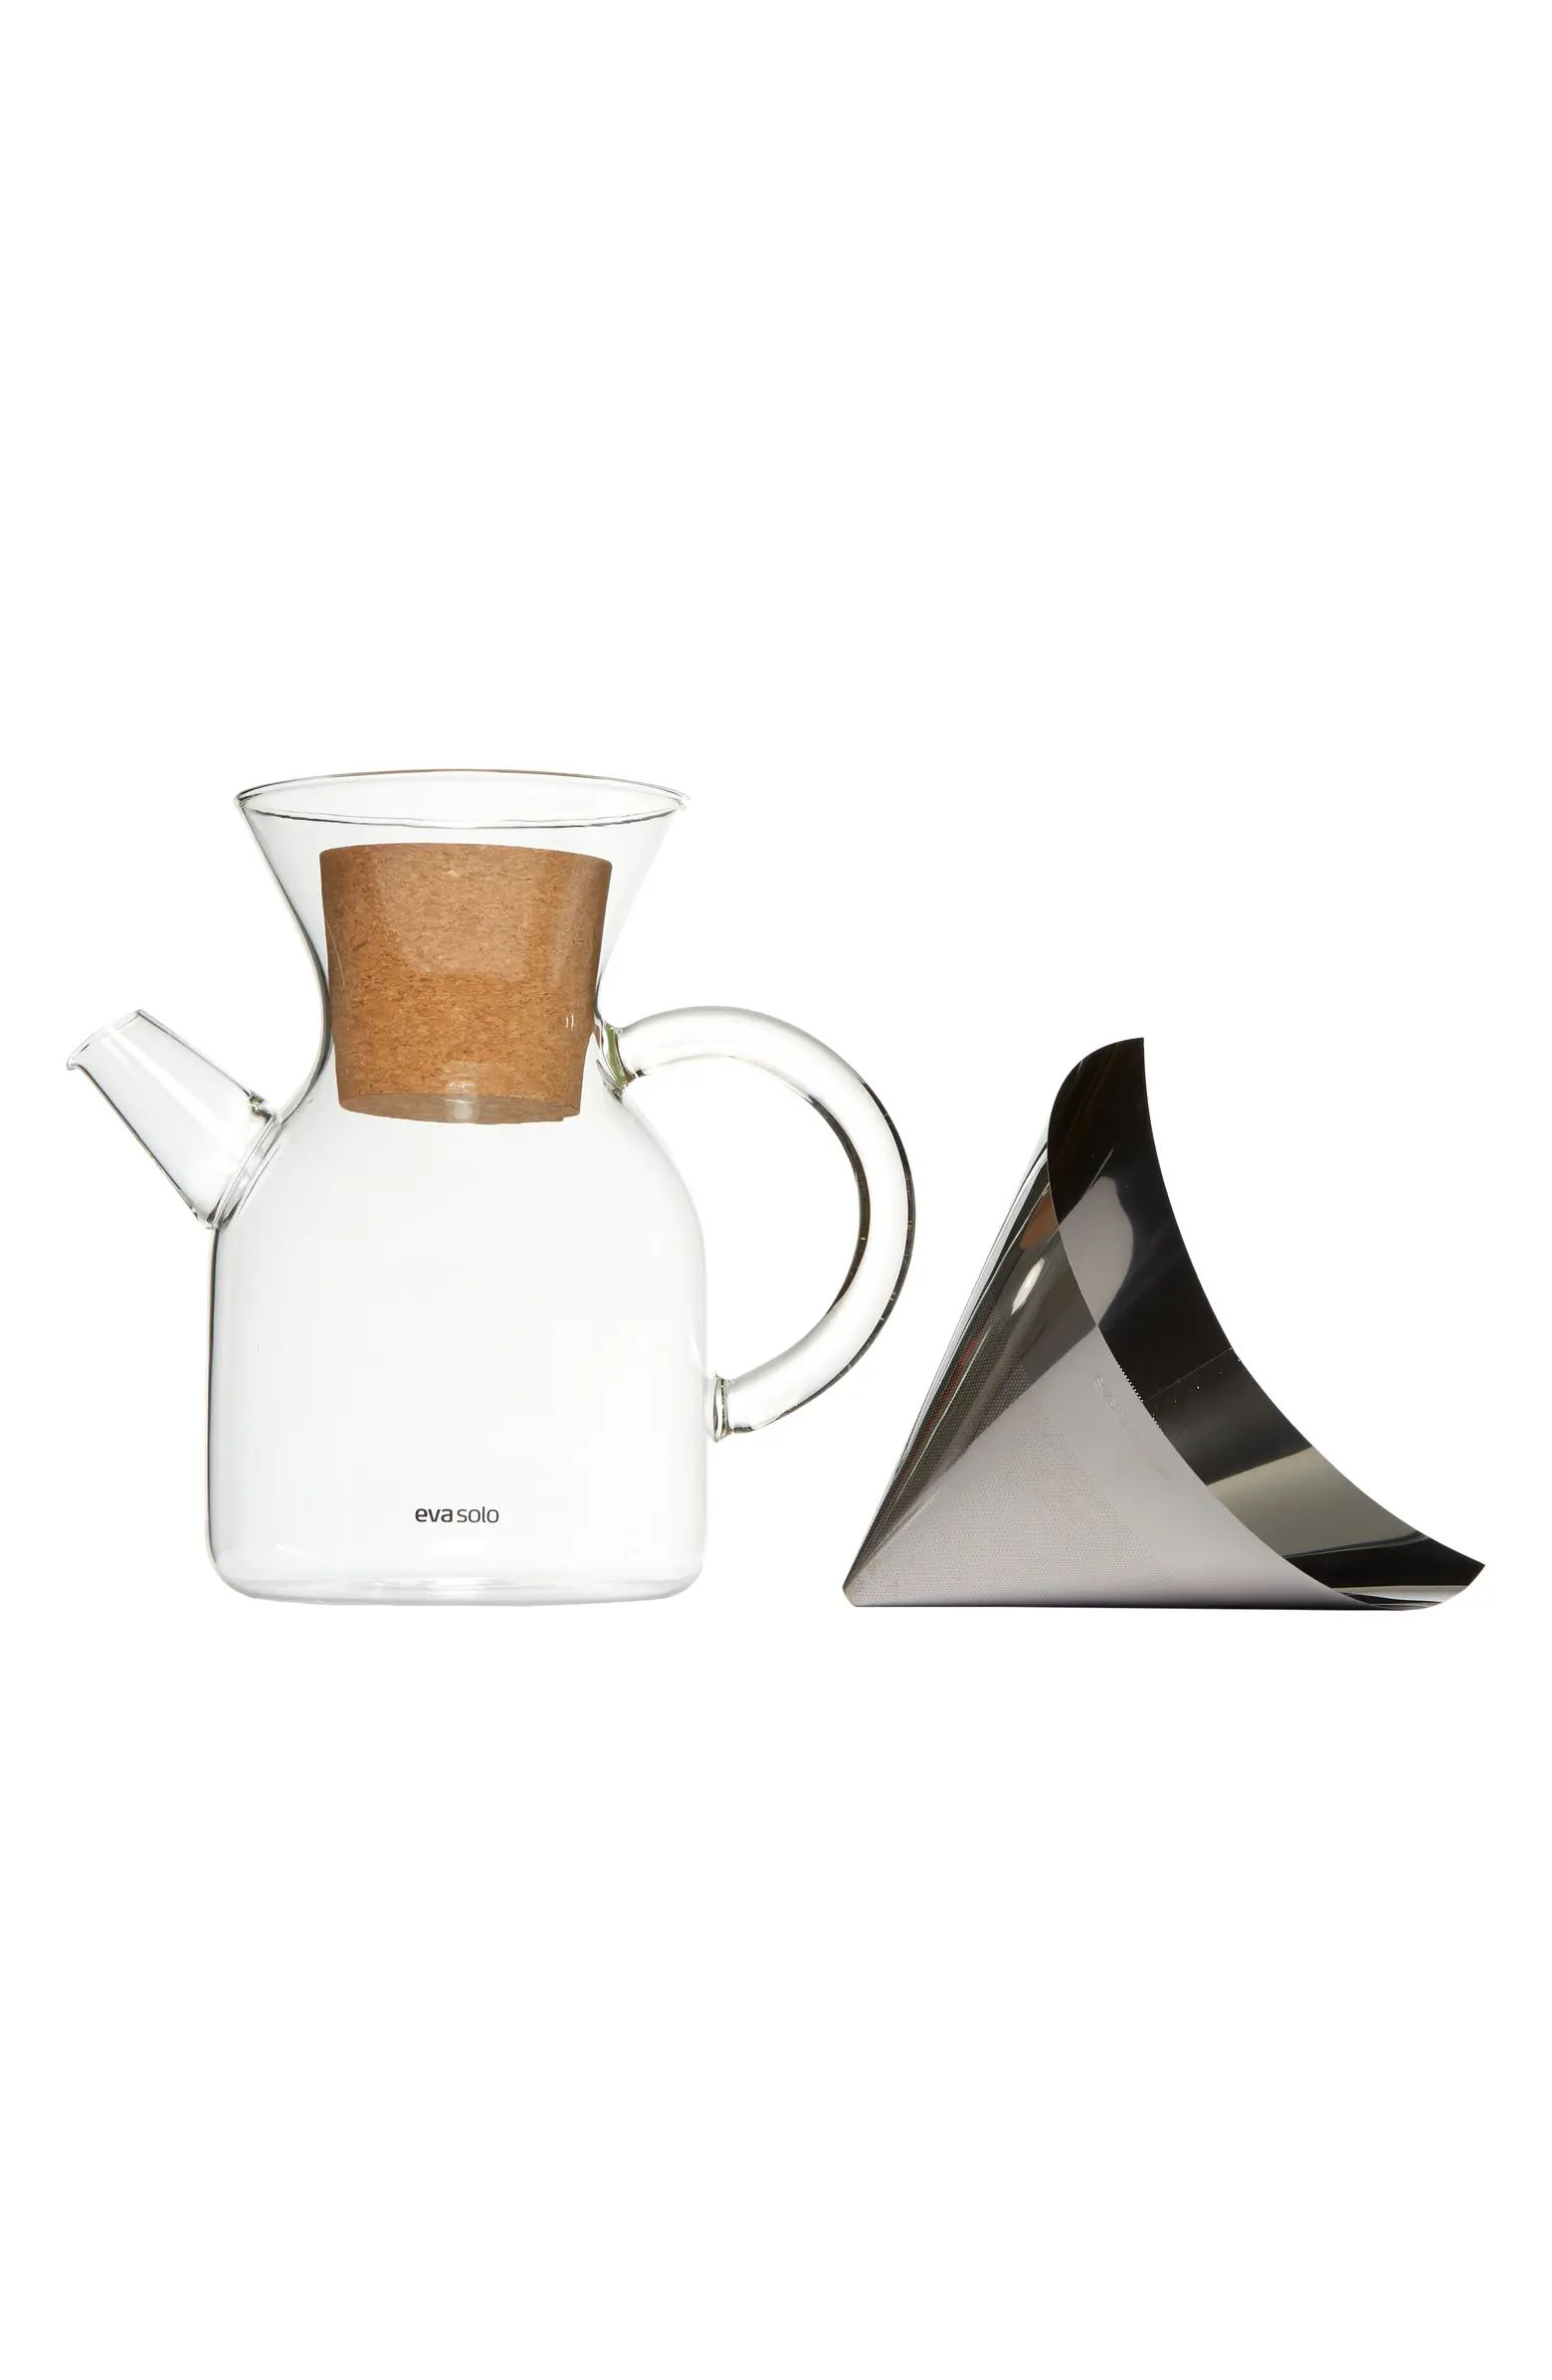 MoMA Design Store Pour Over Coffee Carafe | Nordstrom | Nordstrom